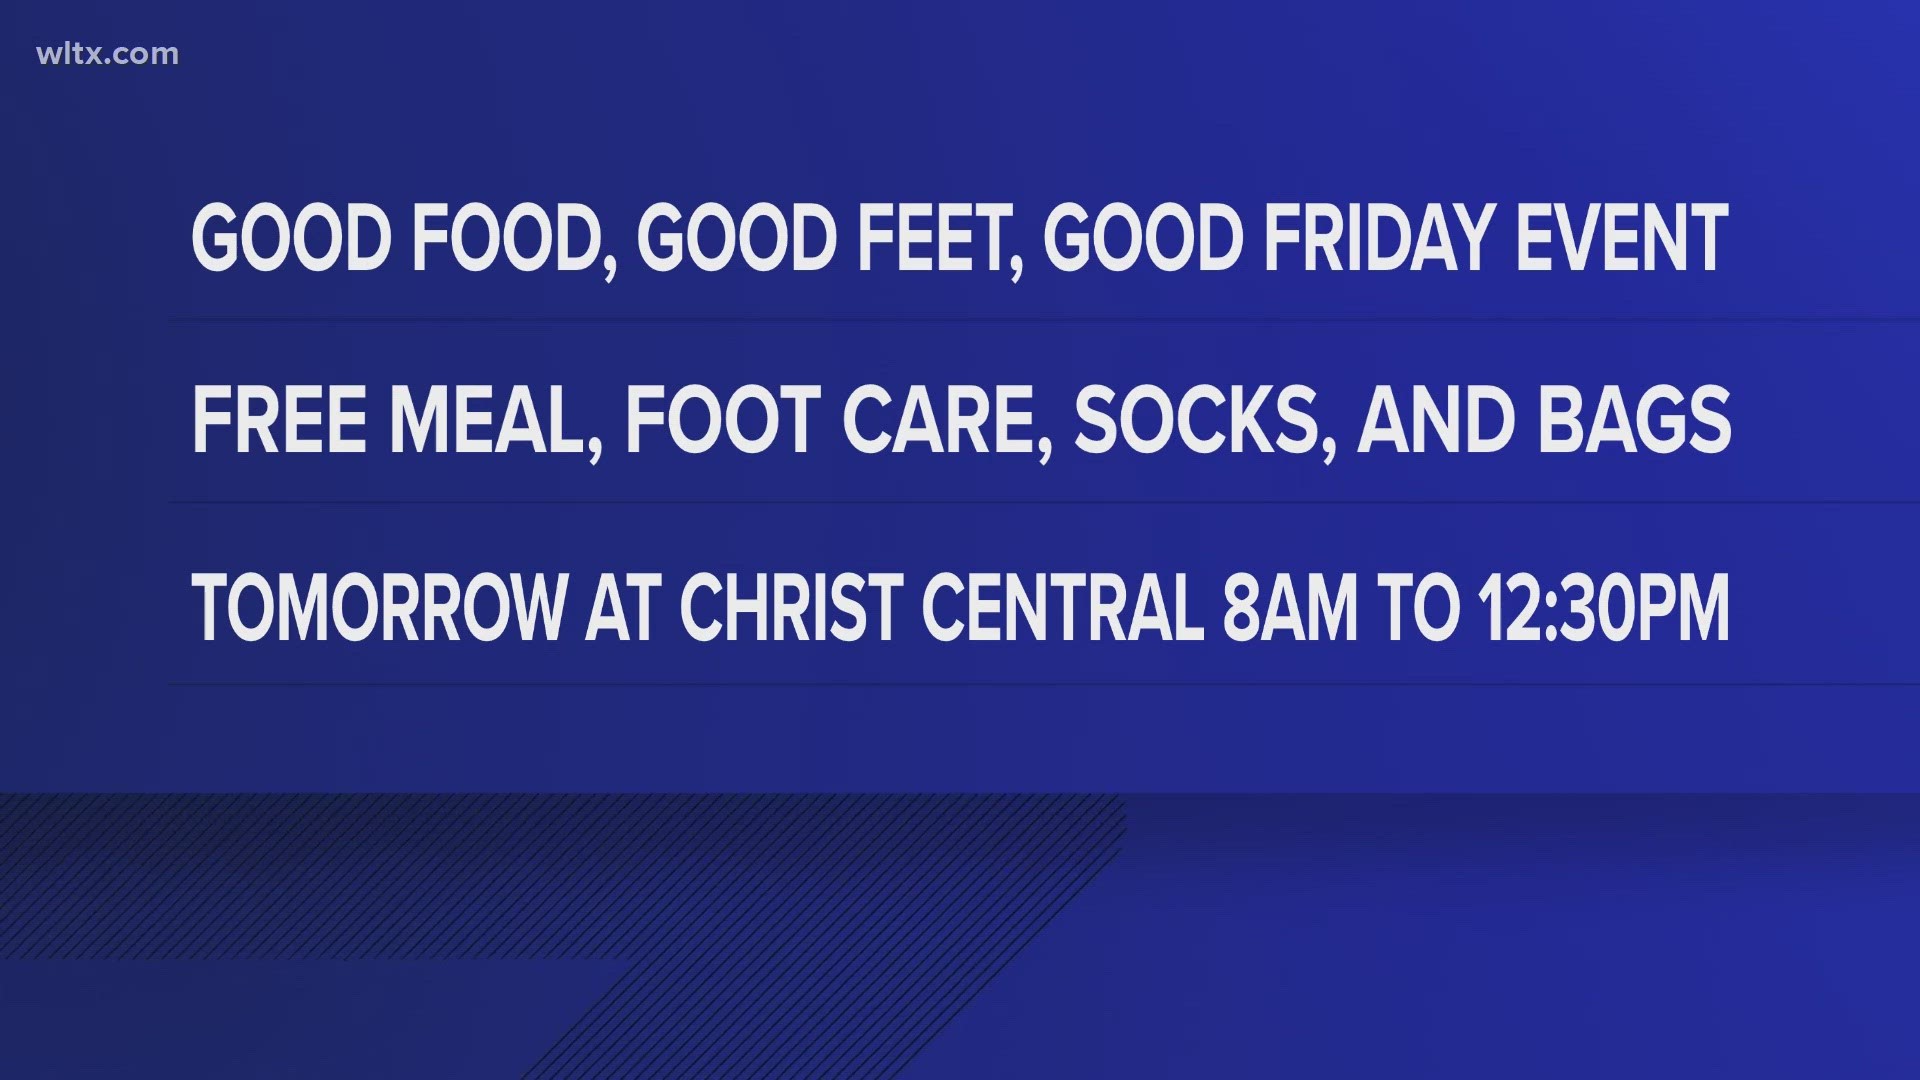 The Good Food, Good Feet, Good Friday event will run from 8 am to 12:30 pm at Christ Central Ministries on Main Street.